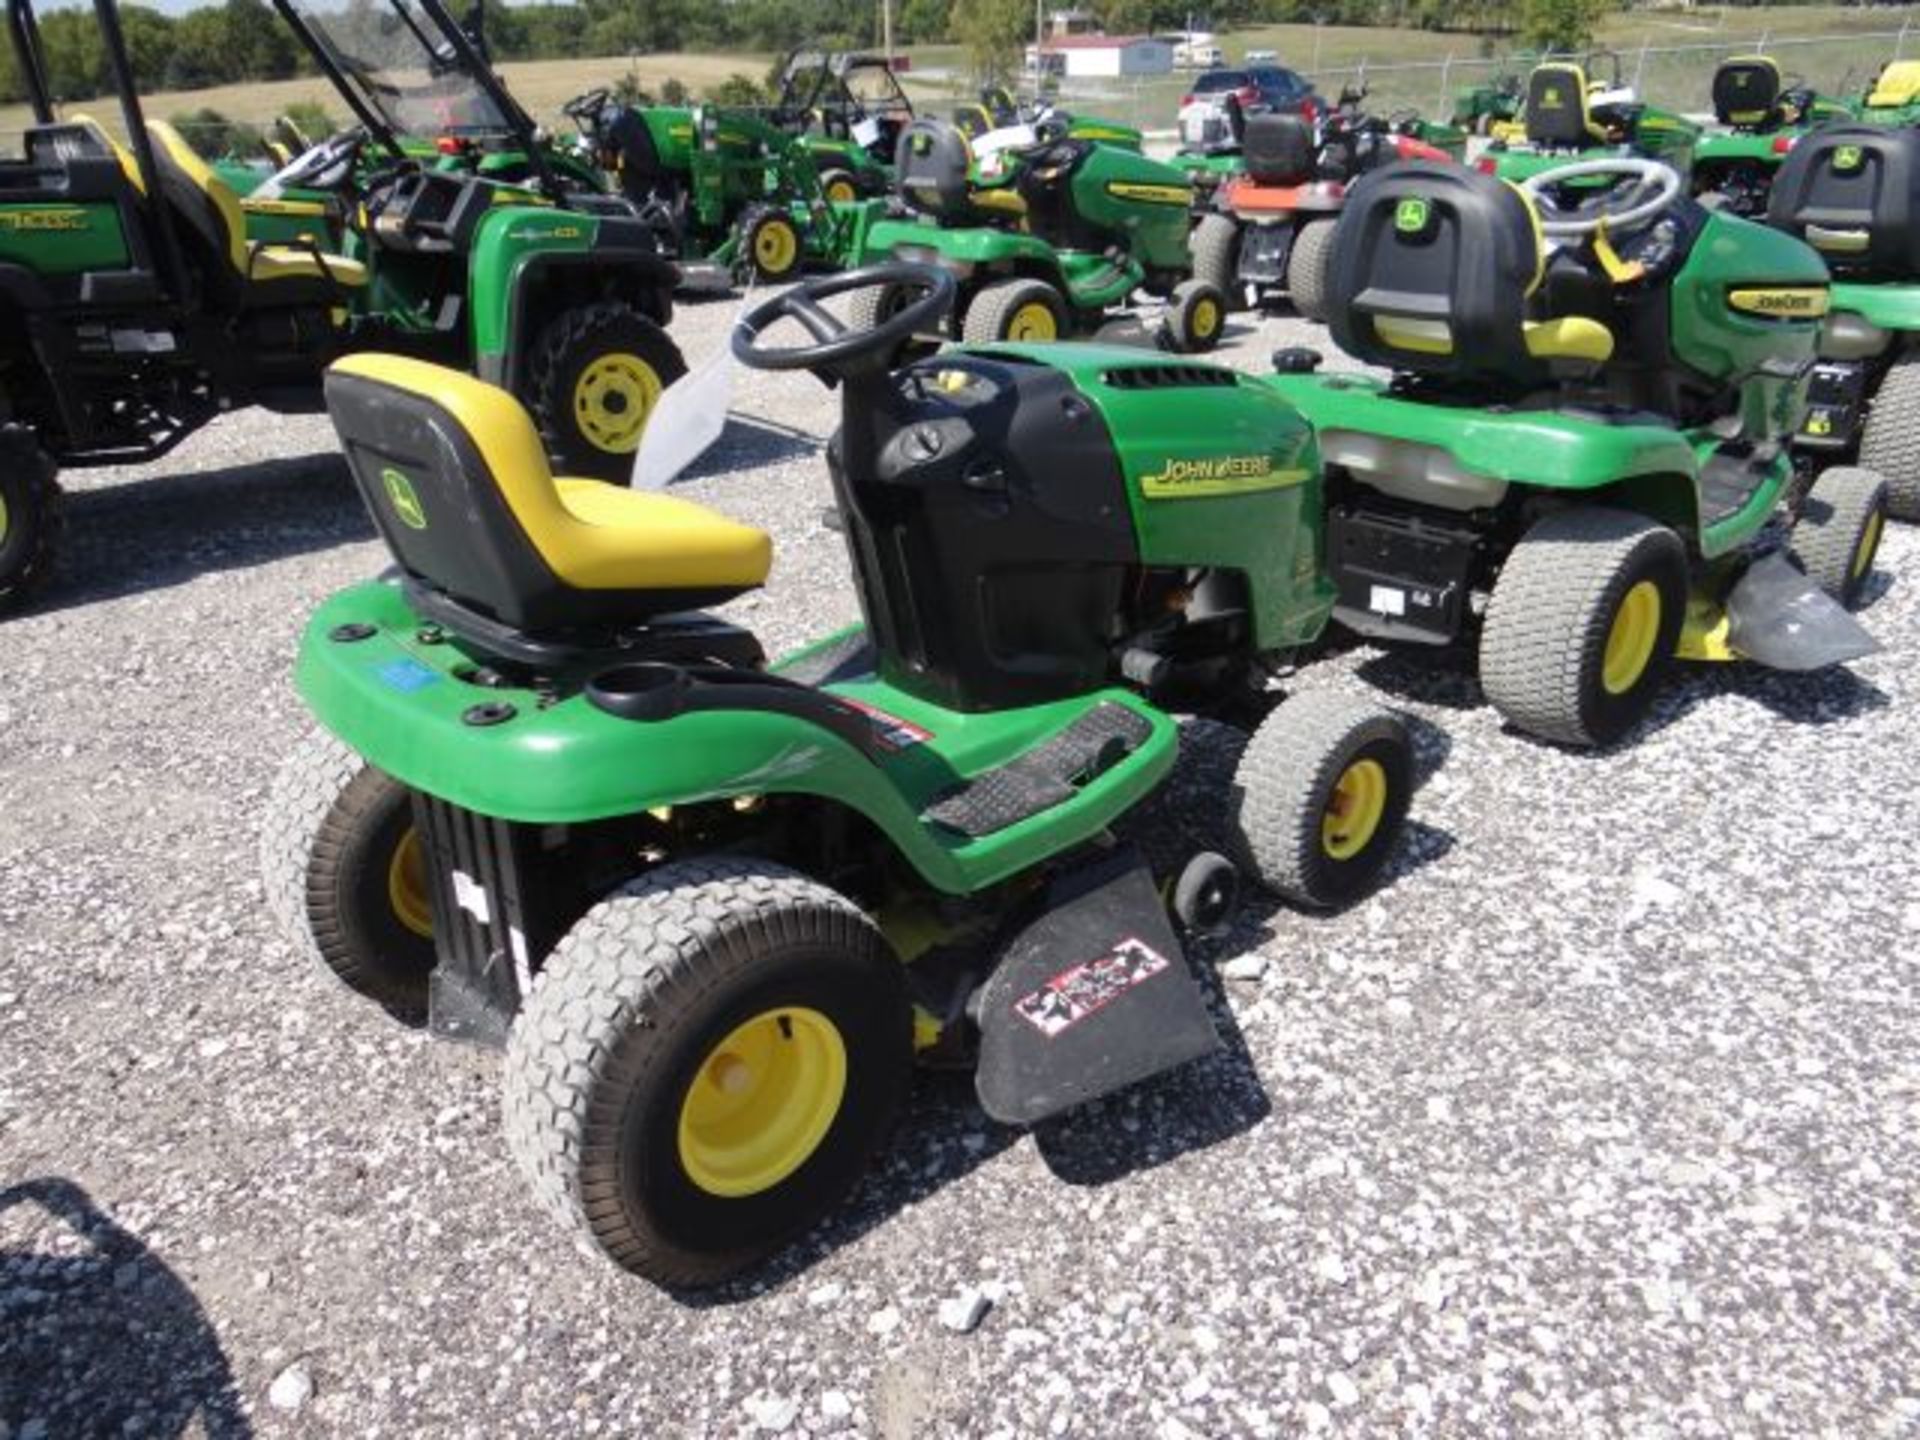 2005 JD L111 Mower 367 hrs, 20hp Briggs, Air Cooled, Hydro, 42" Deck - Image 2 of 3